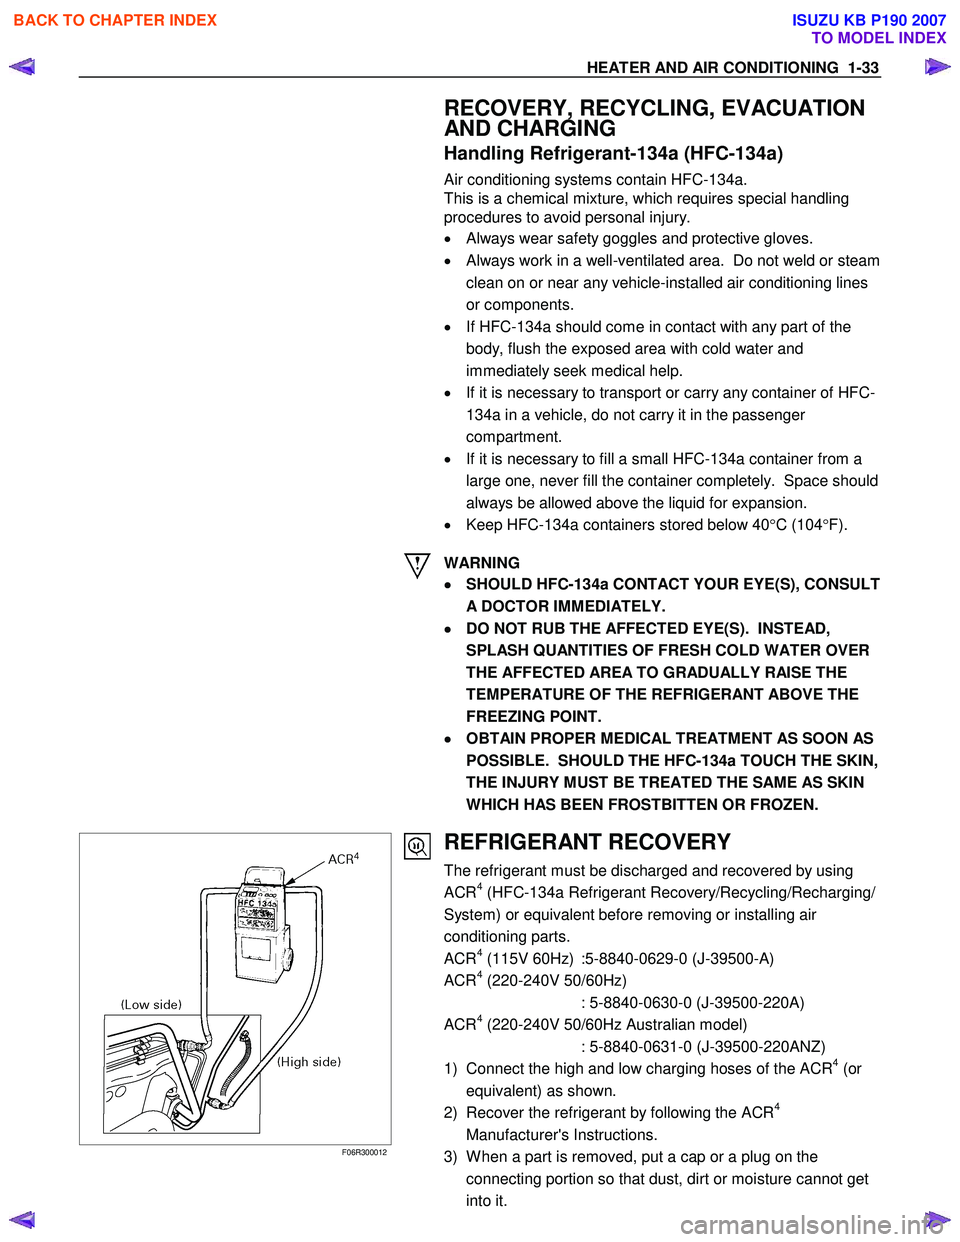 ISUZU KB P190 2007  Workshop Repair Manual HEATER AND AIR CONDITIONING  1-33 
  RECOVERY, RECYCLING, EVACUATION  
AND CHARGING 
Handling Refrigerant-134a (HFC-134a) 
Air conditioning systems contain HFC-134a.  
This is a chemical mixture, whic